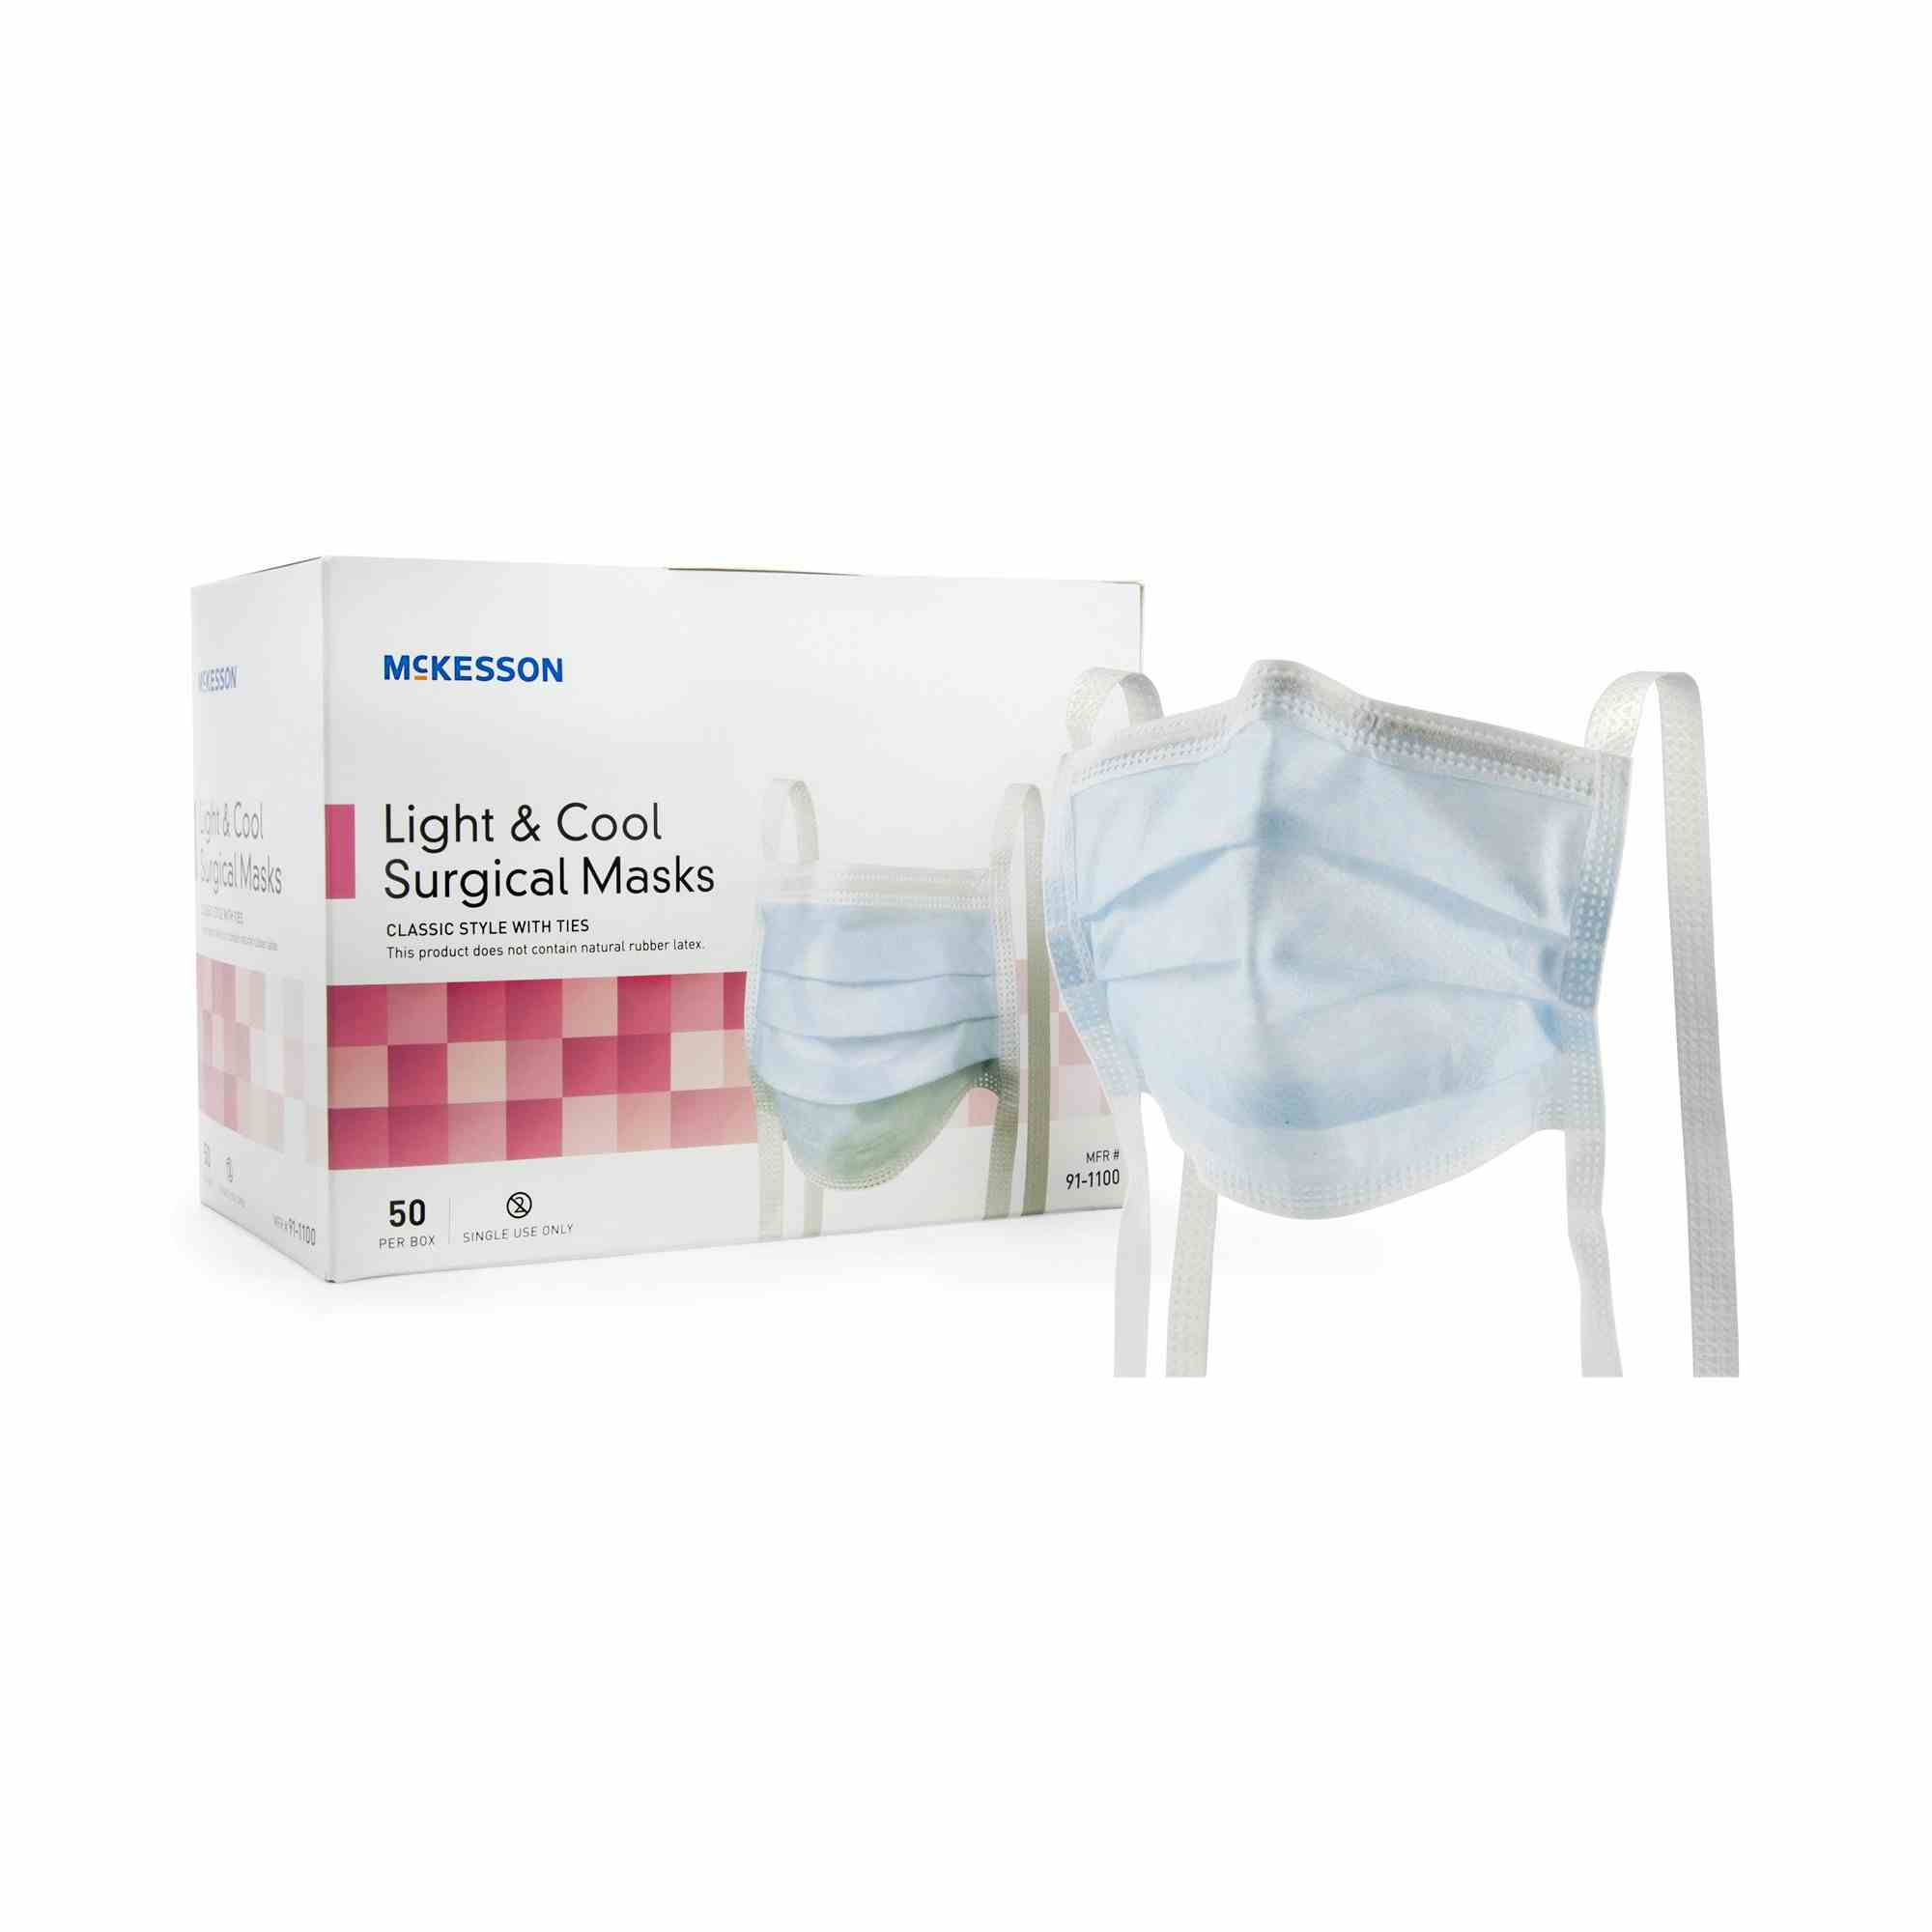 McKesson Light & Cool Surgical Masks, 91-1100, Case of 300 (6 Boxes)